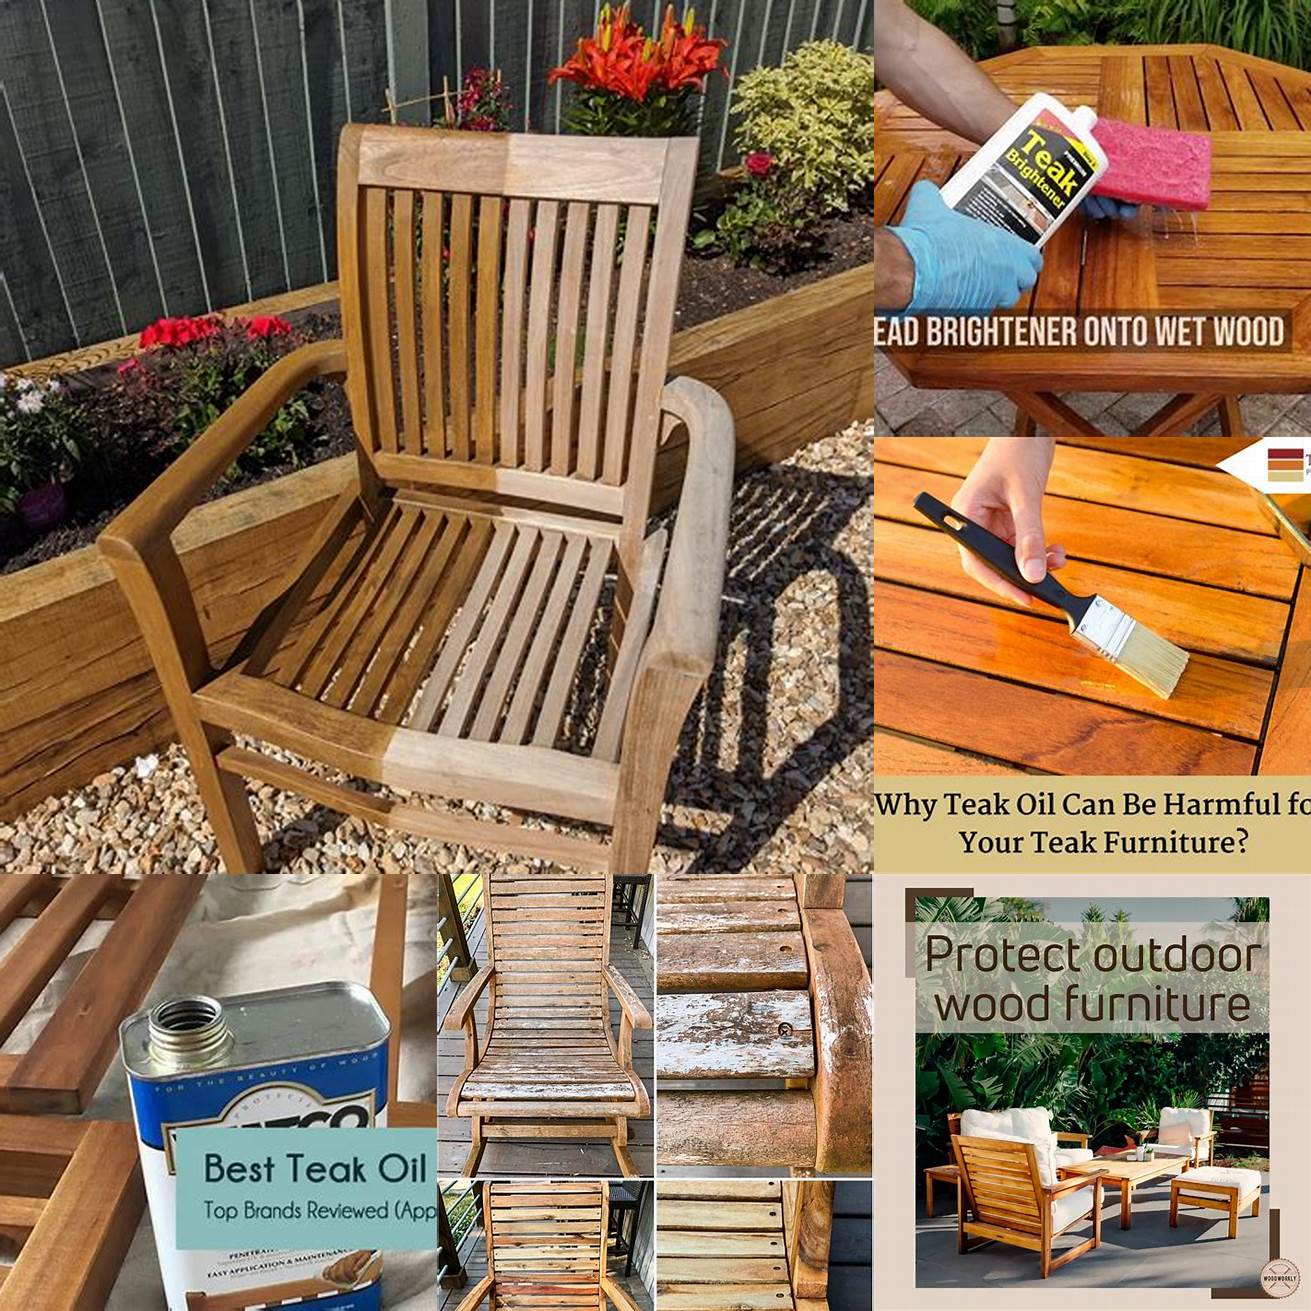 Photos of teak oil protecting outdoor furniture from the elements